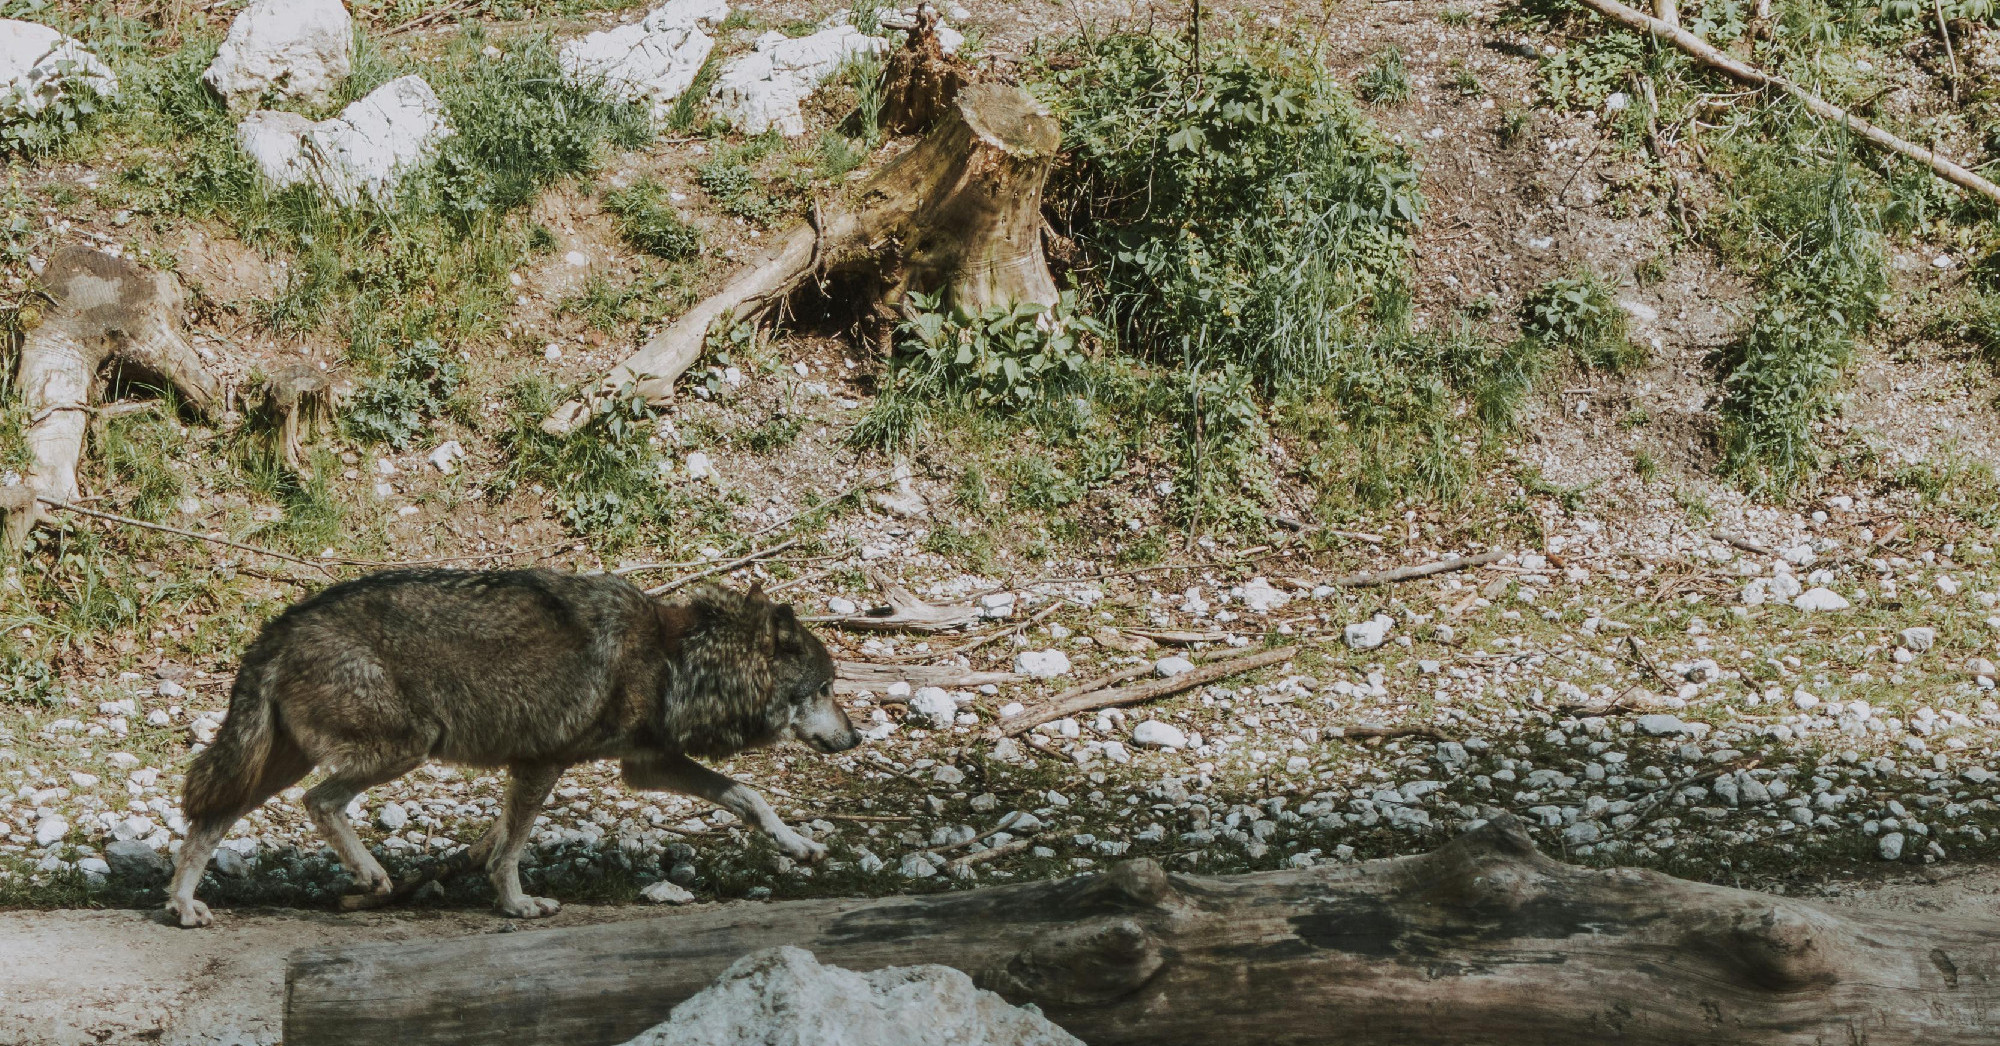 They tackle the river and the forest, but we chase them – let's look at wolves differently!